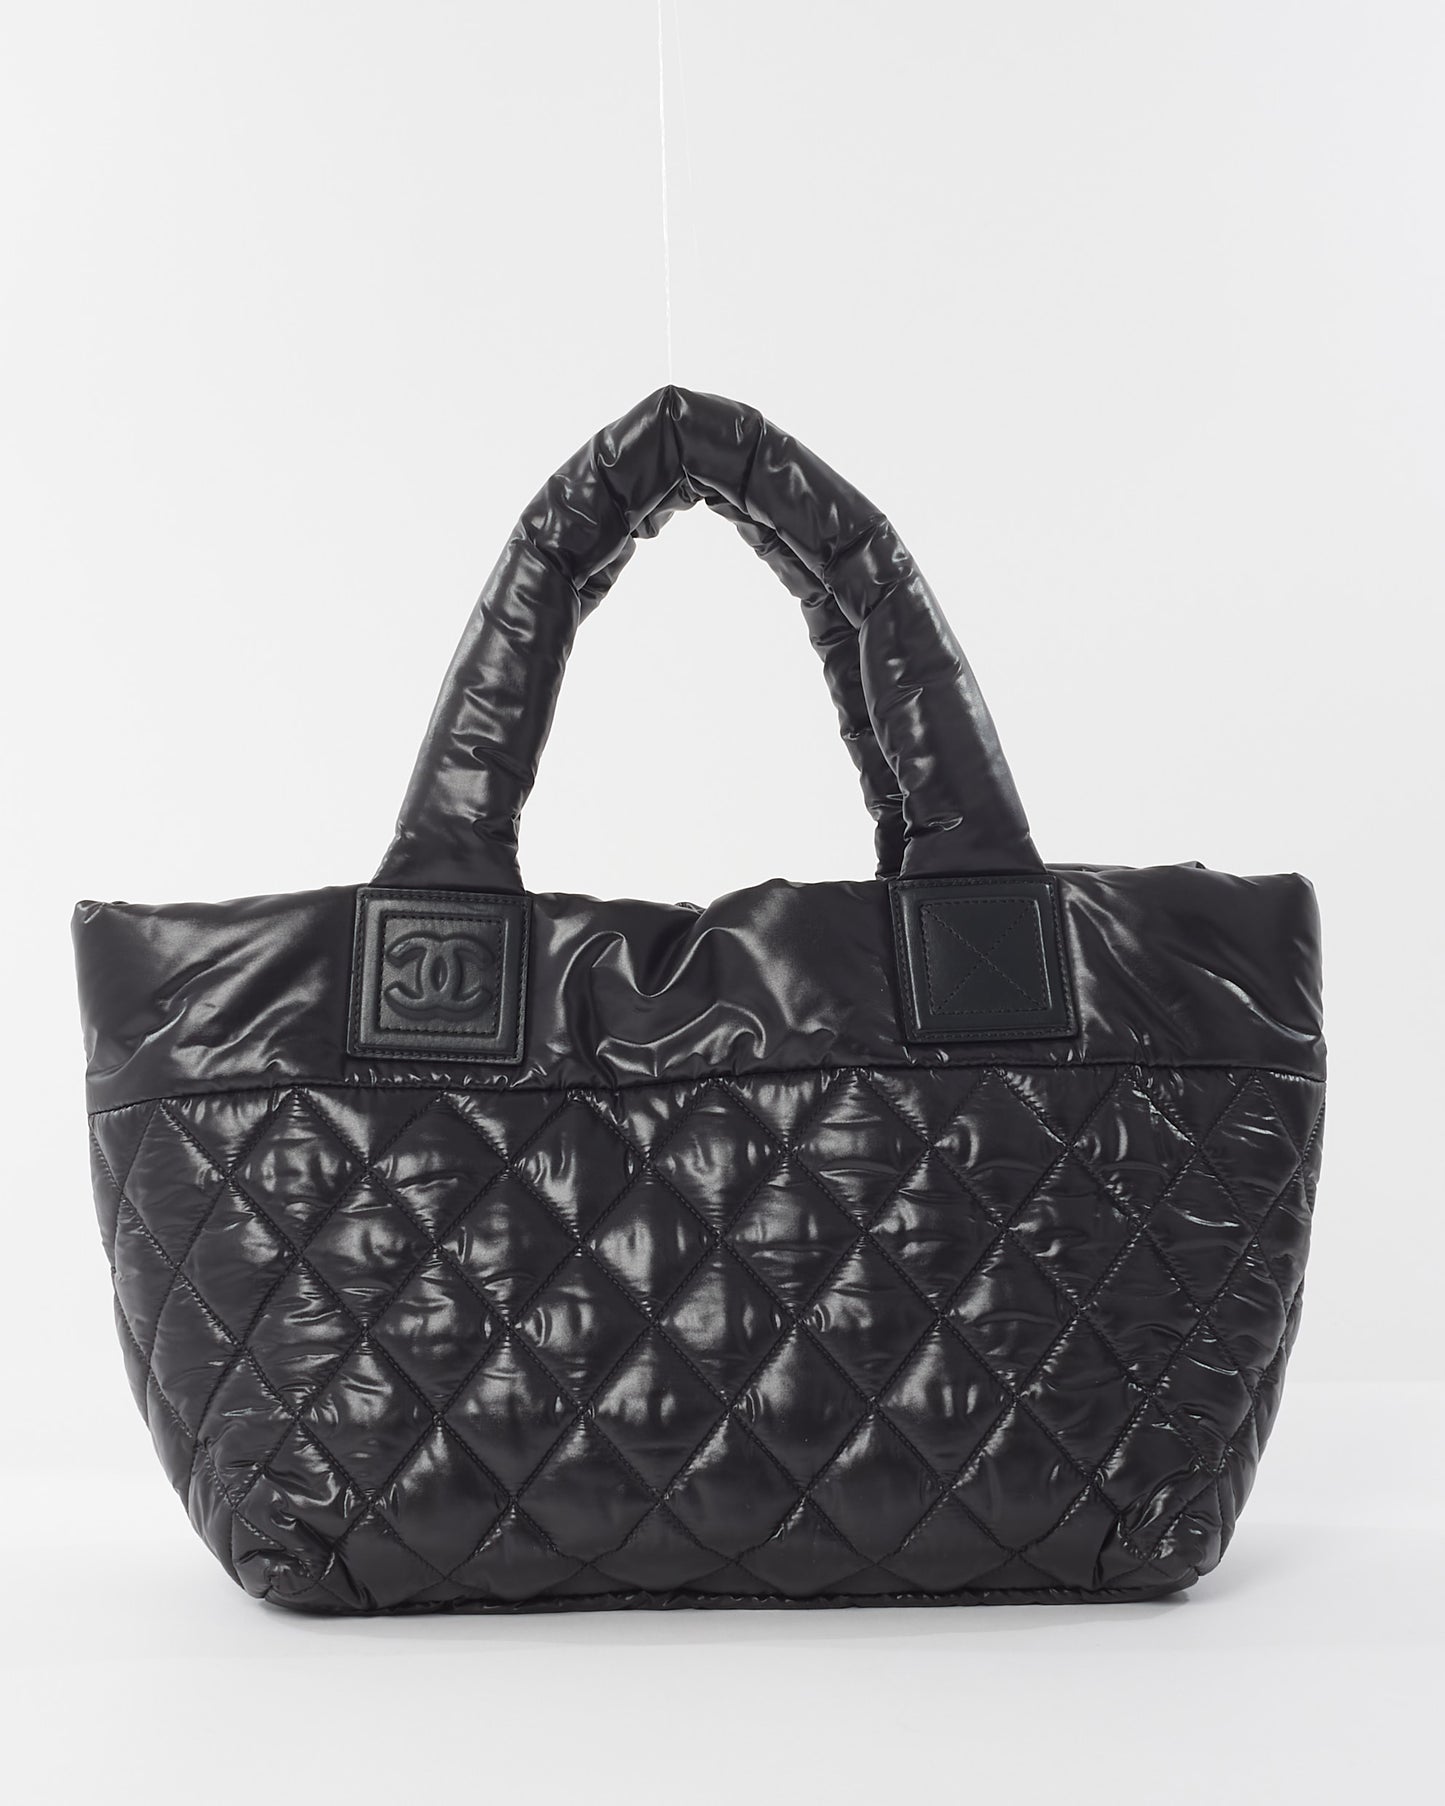 Chanel Black Nylon Coco Cocoon Quilted Puffer Tote